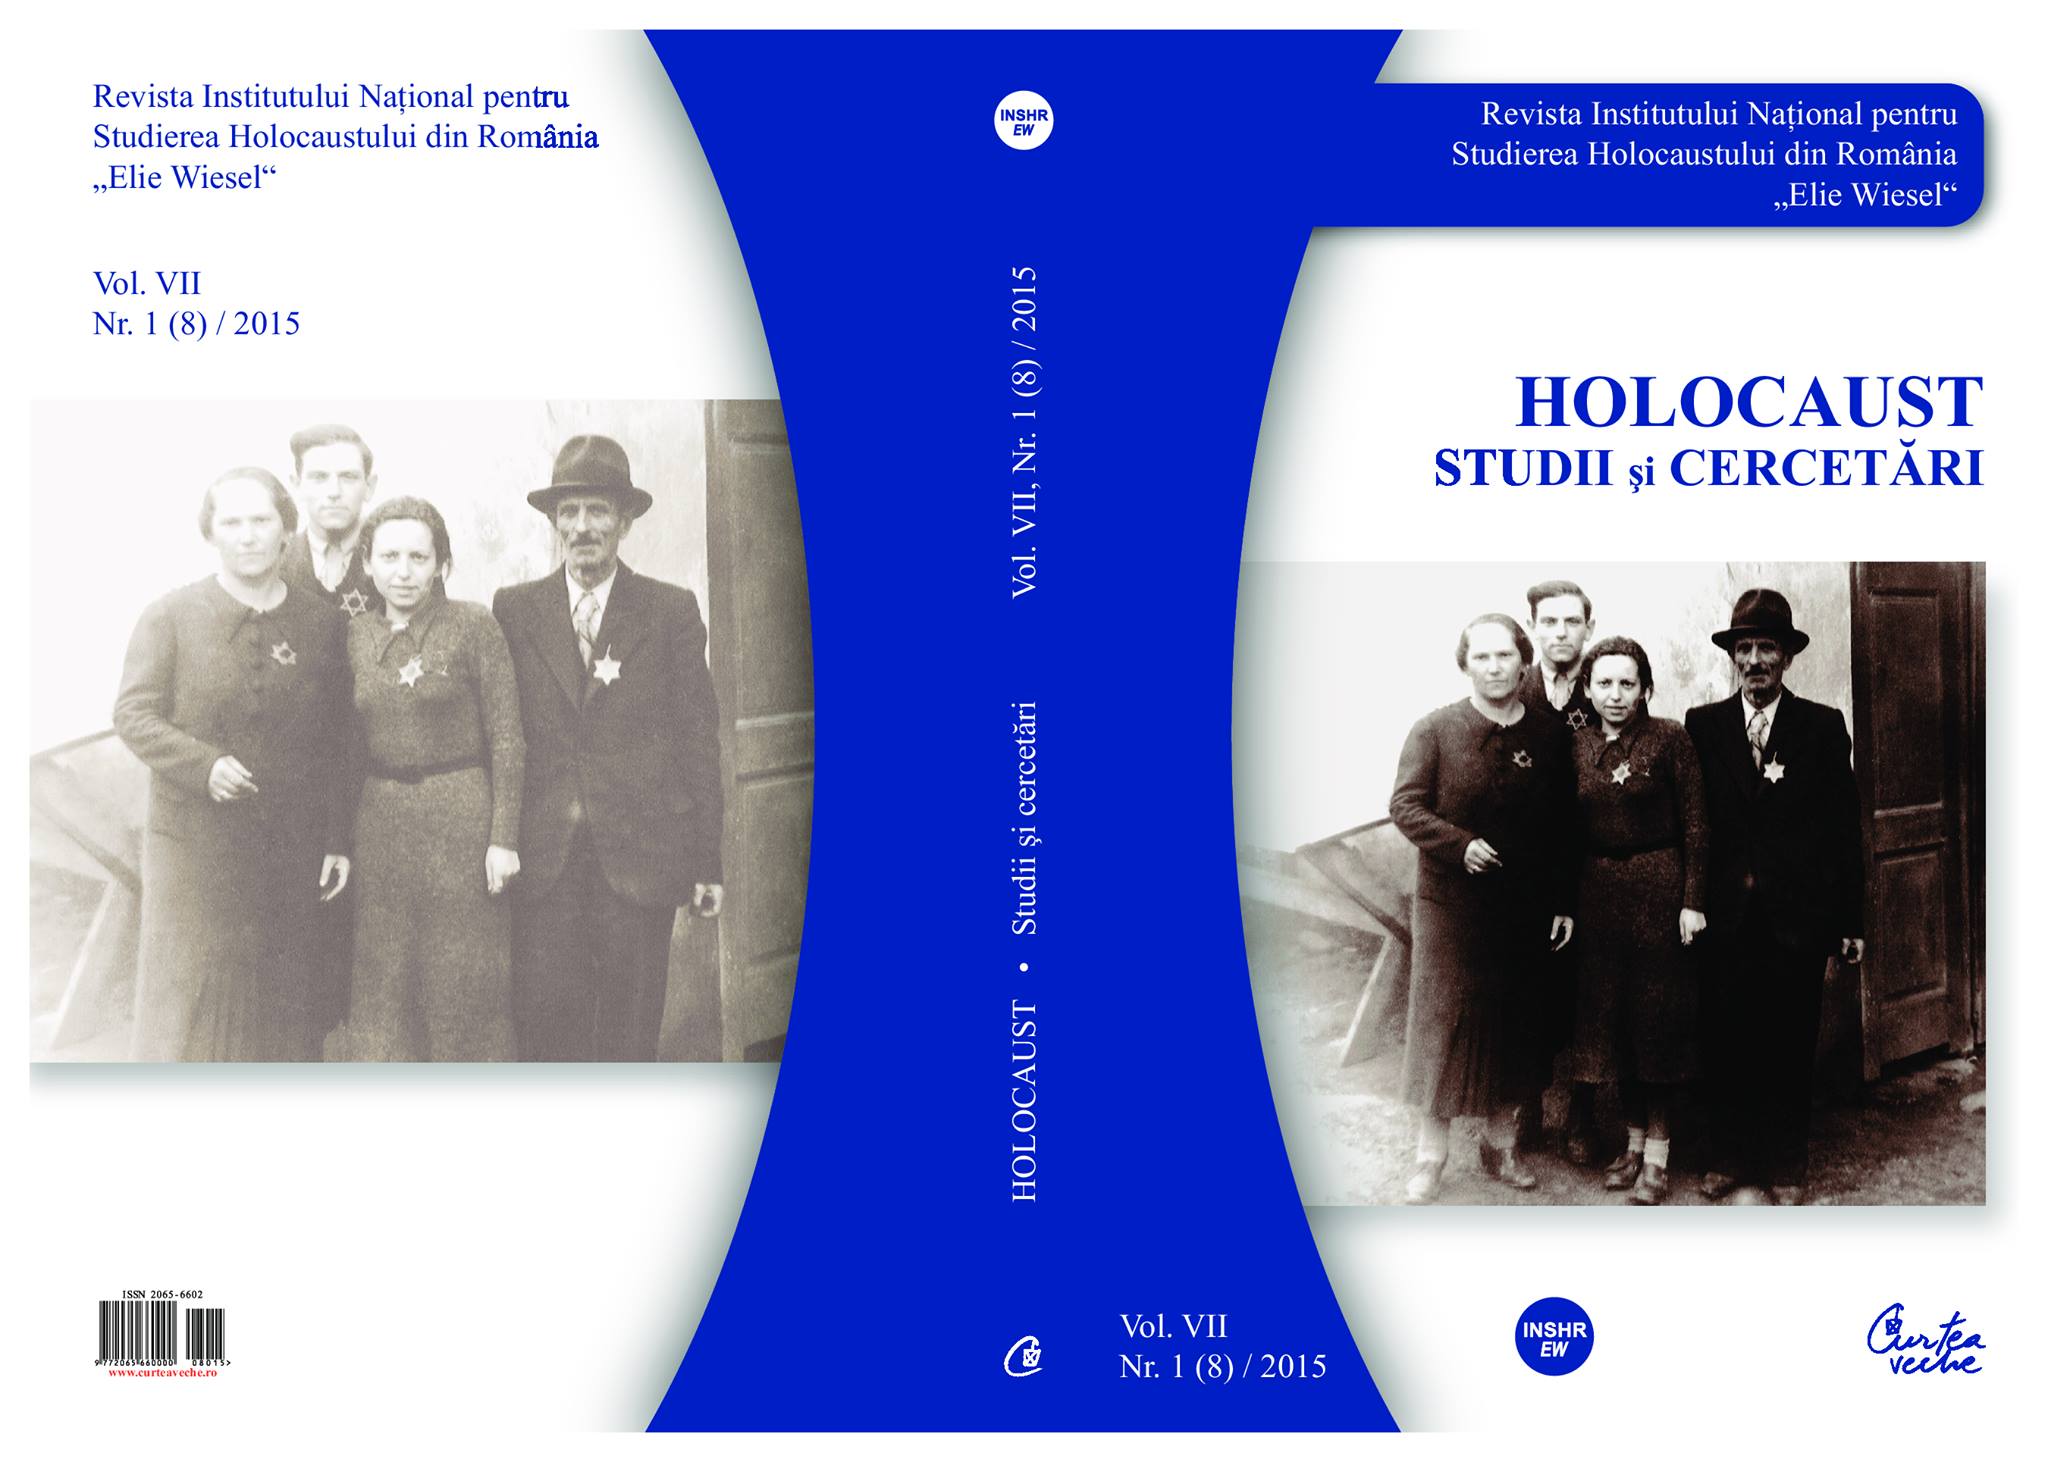 Cultural Communication Through Images about the Self and the Others — The Romanian Jewish Community Cover Image